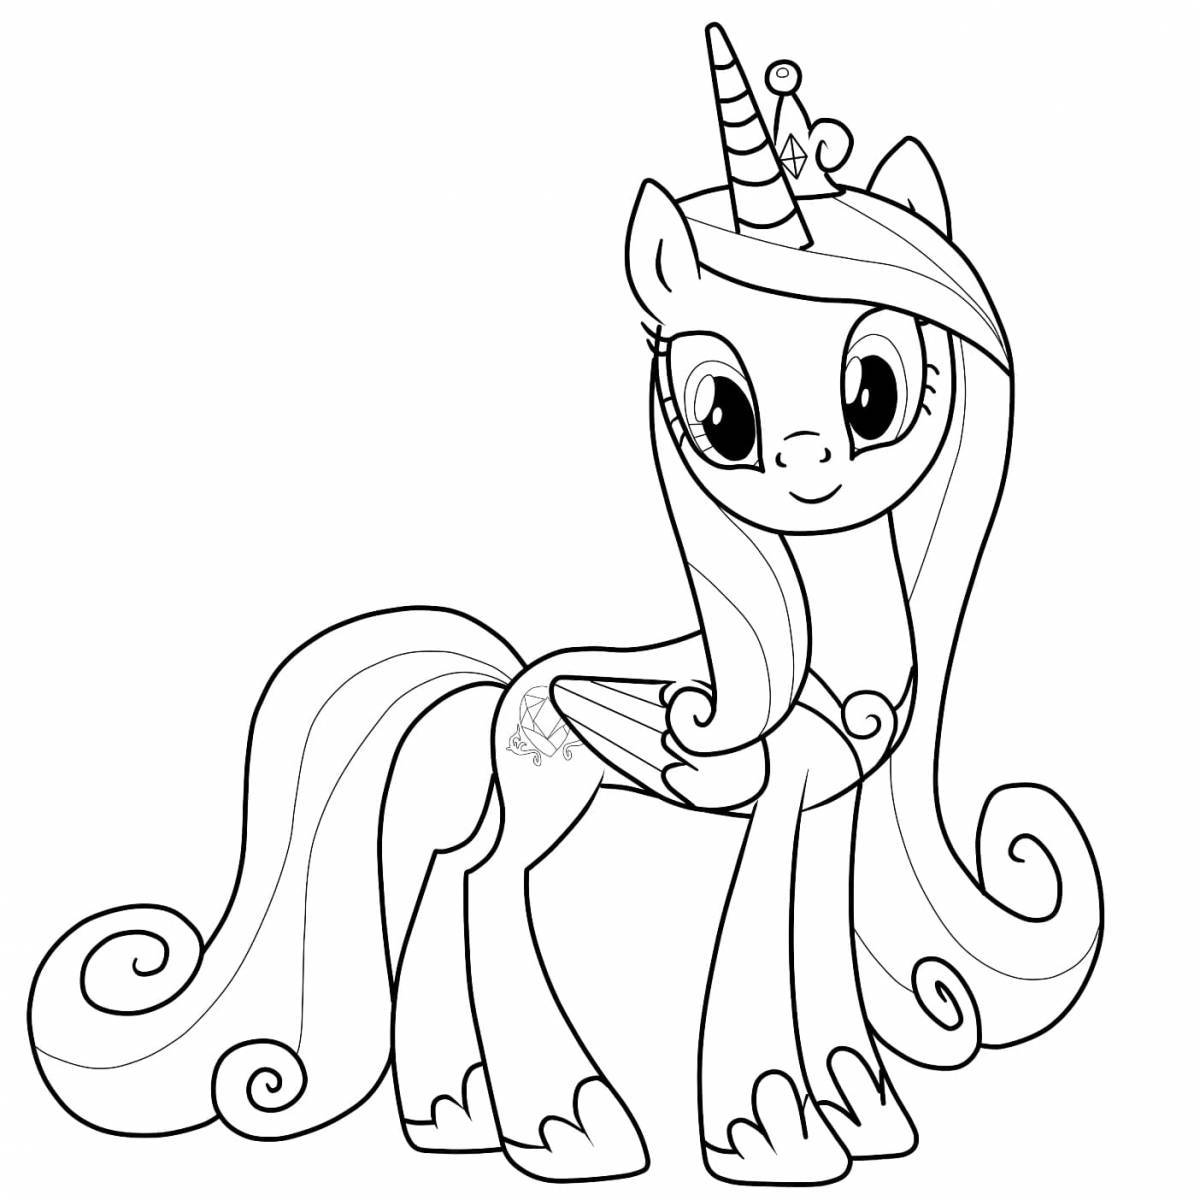 My little pony holiday coloring book